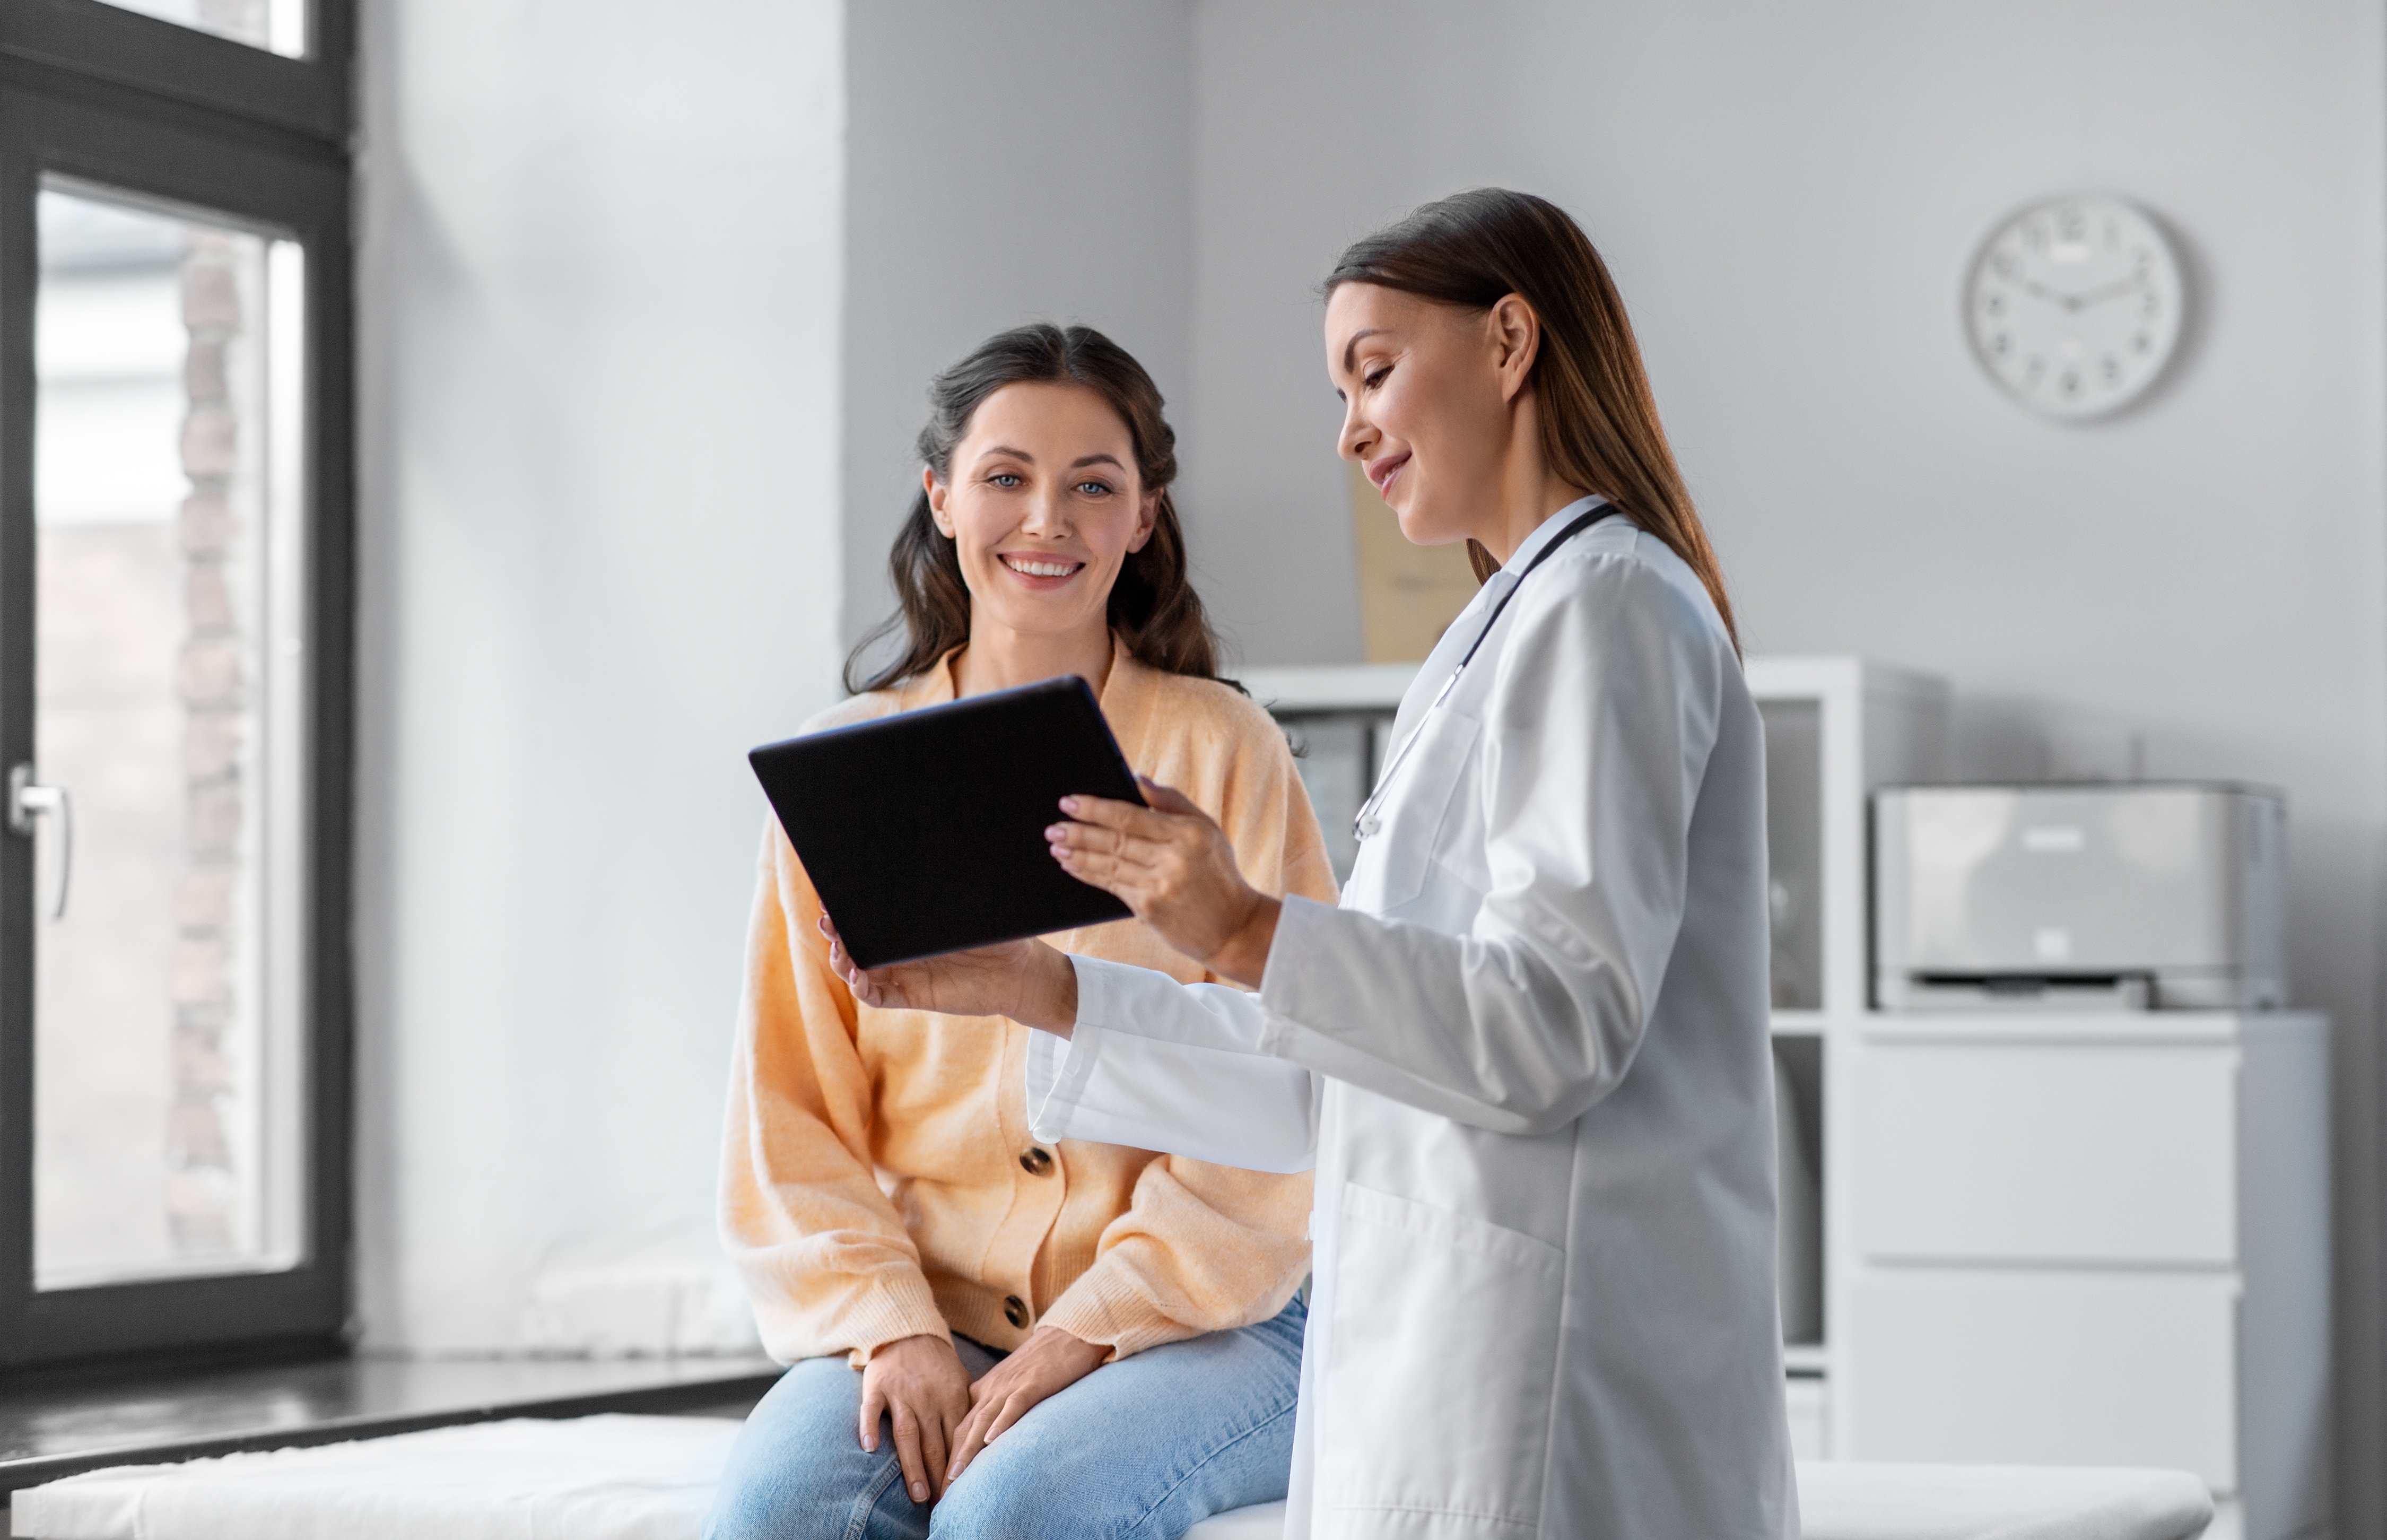 A young woman meets with their doctor in a clinical setting; the two review information on a tablet